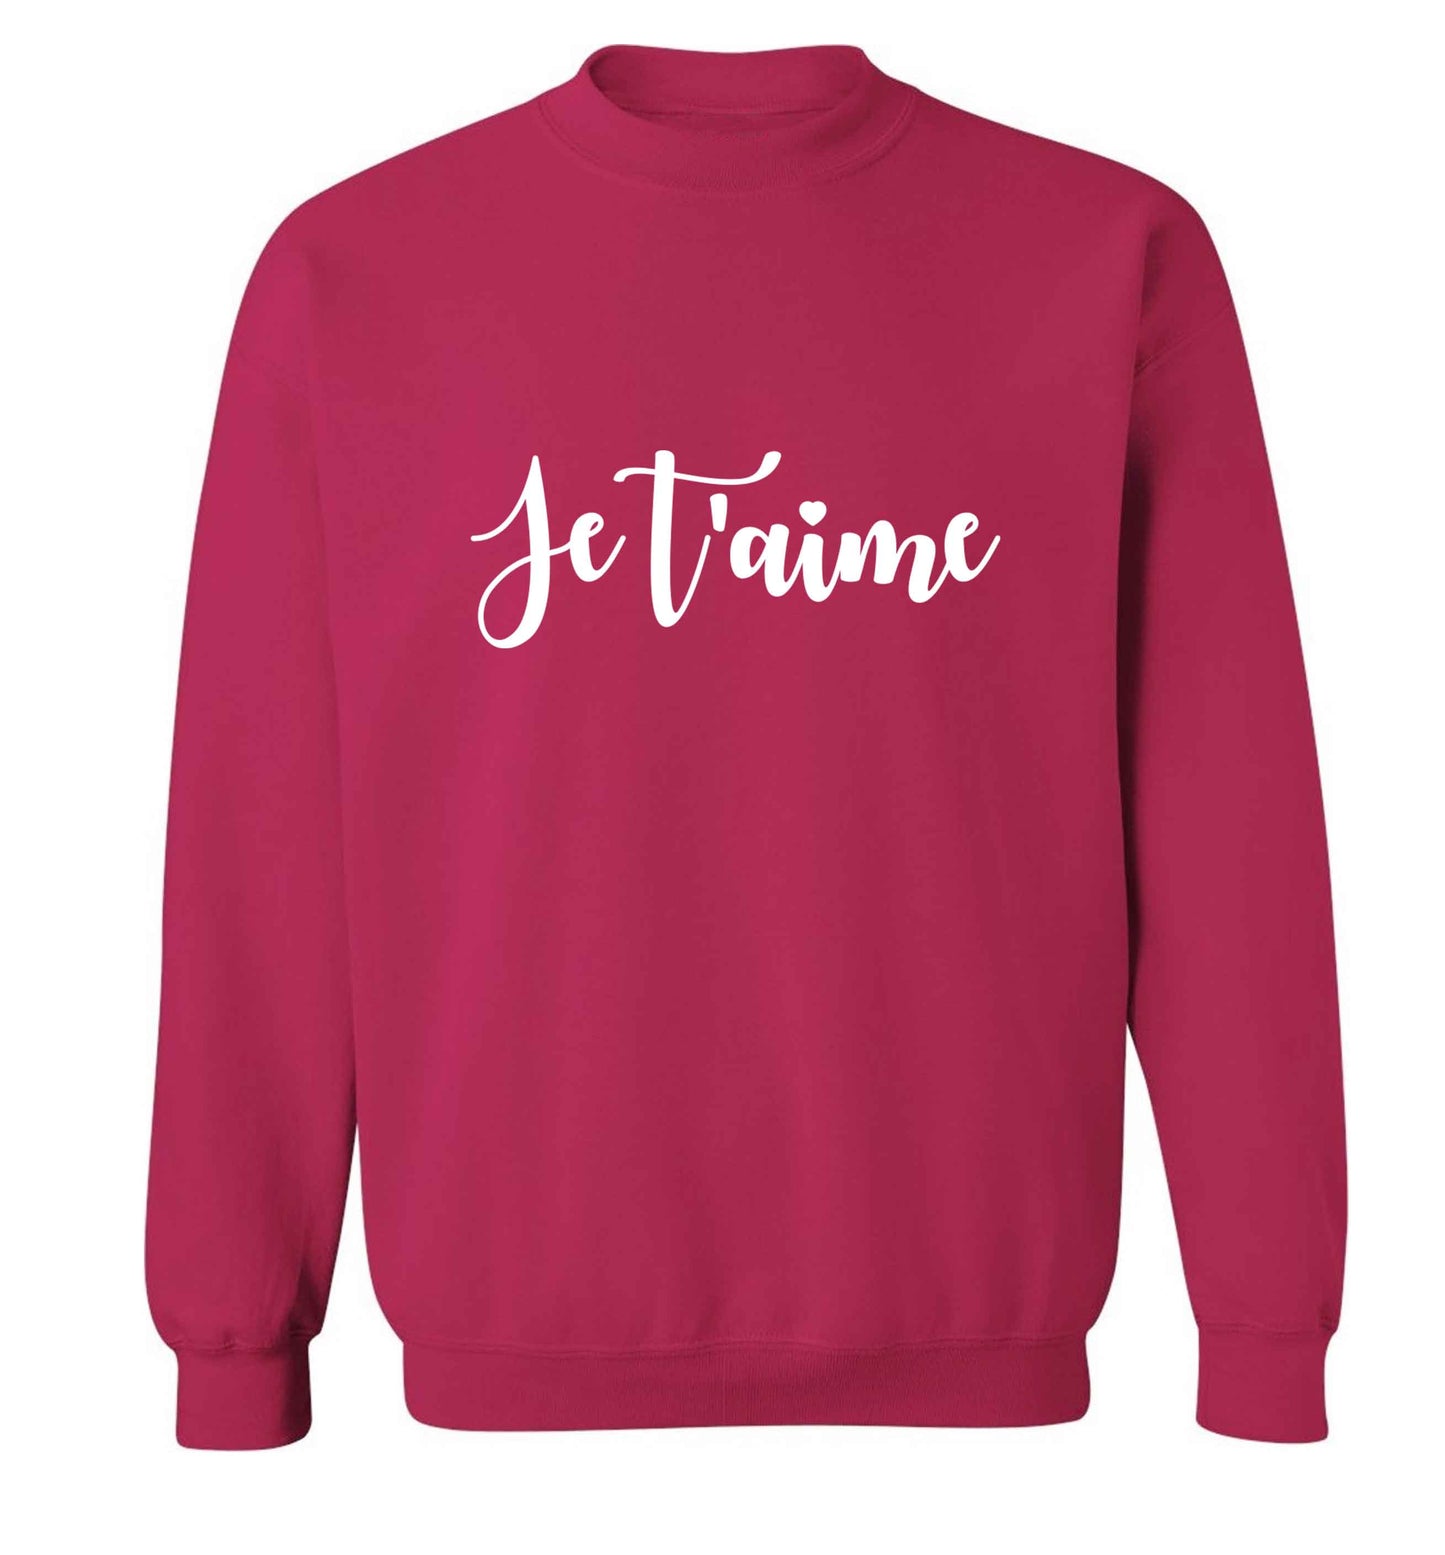 Je t'aime adult's unisex pink sweater 2XL